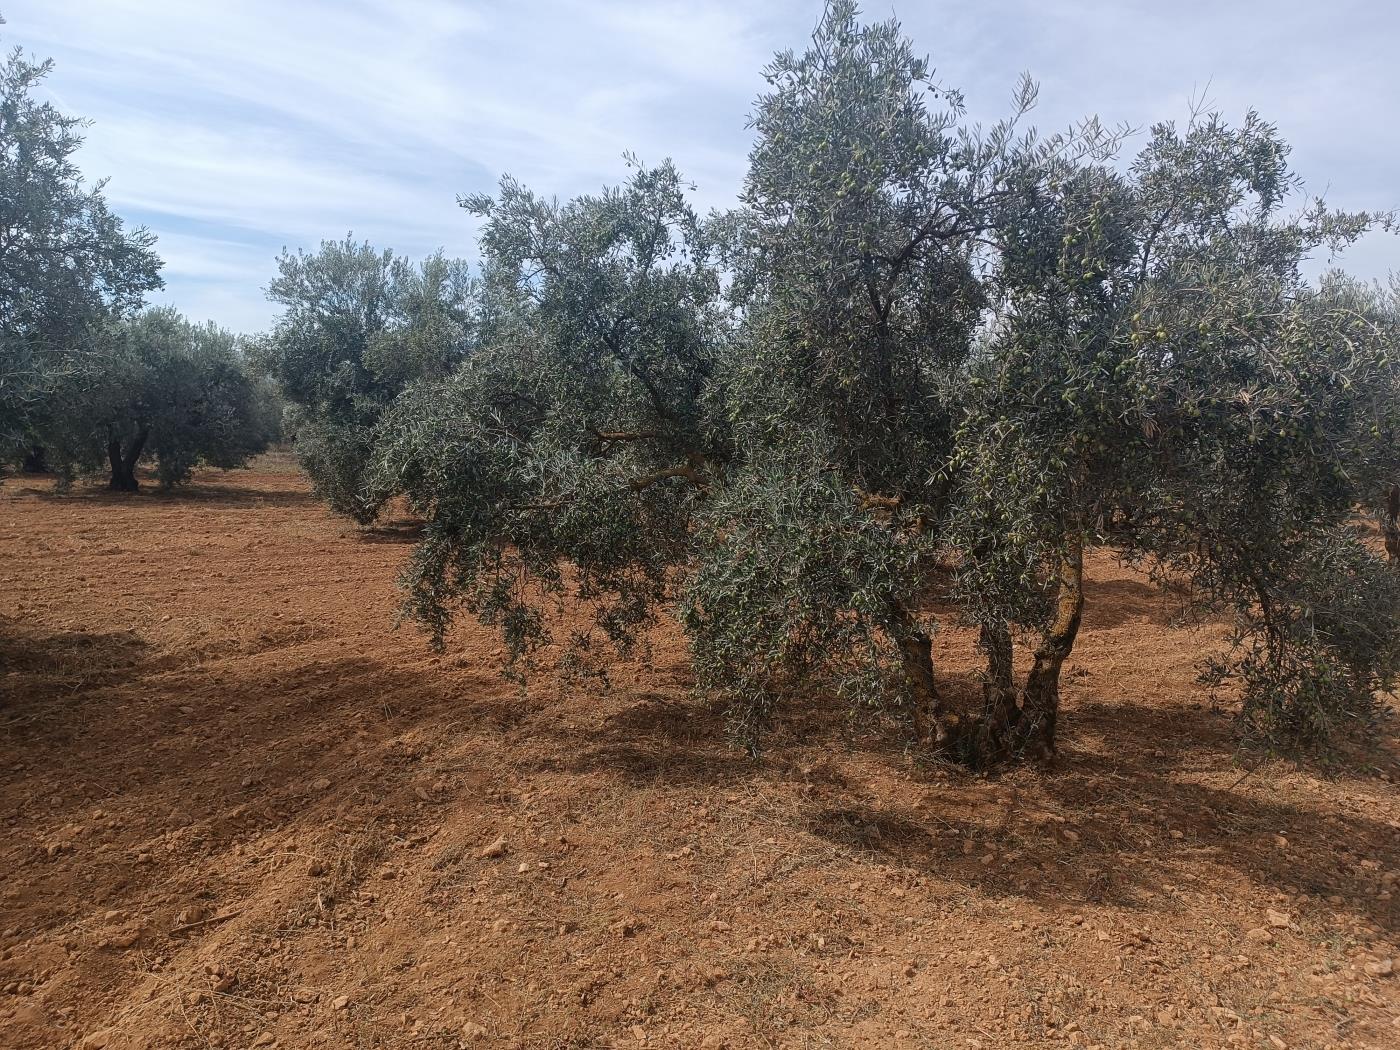 6000 m2 estate with olive trees, with the possibility of a tool shed in Dúrcal. in Dúrcal